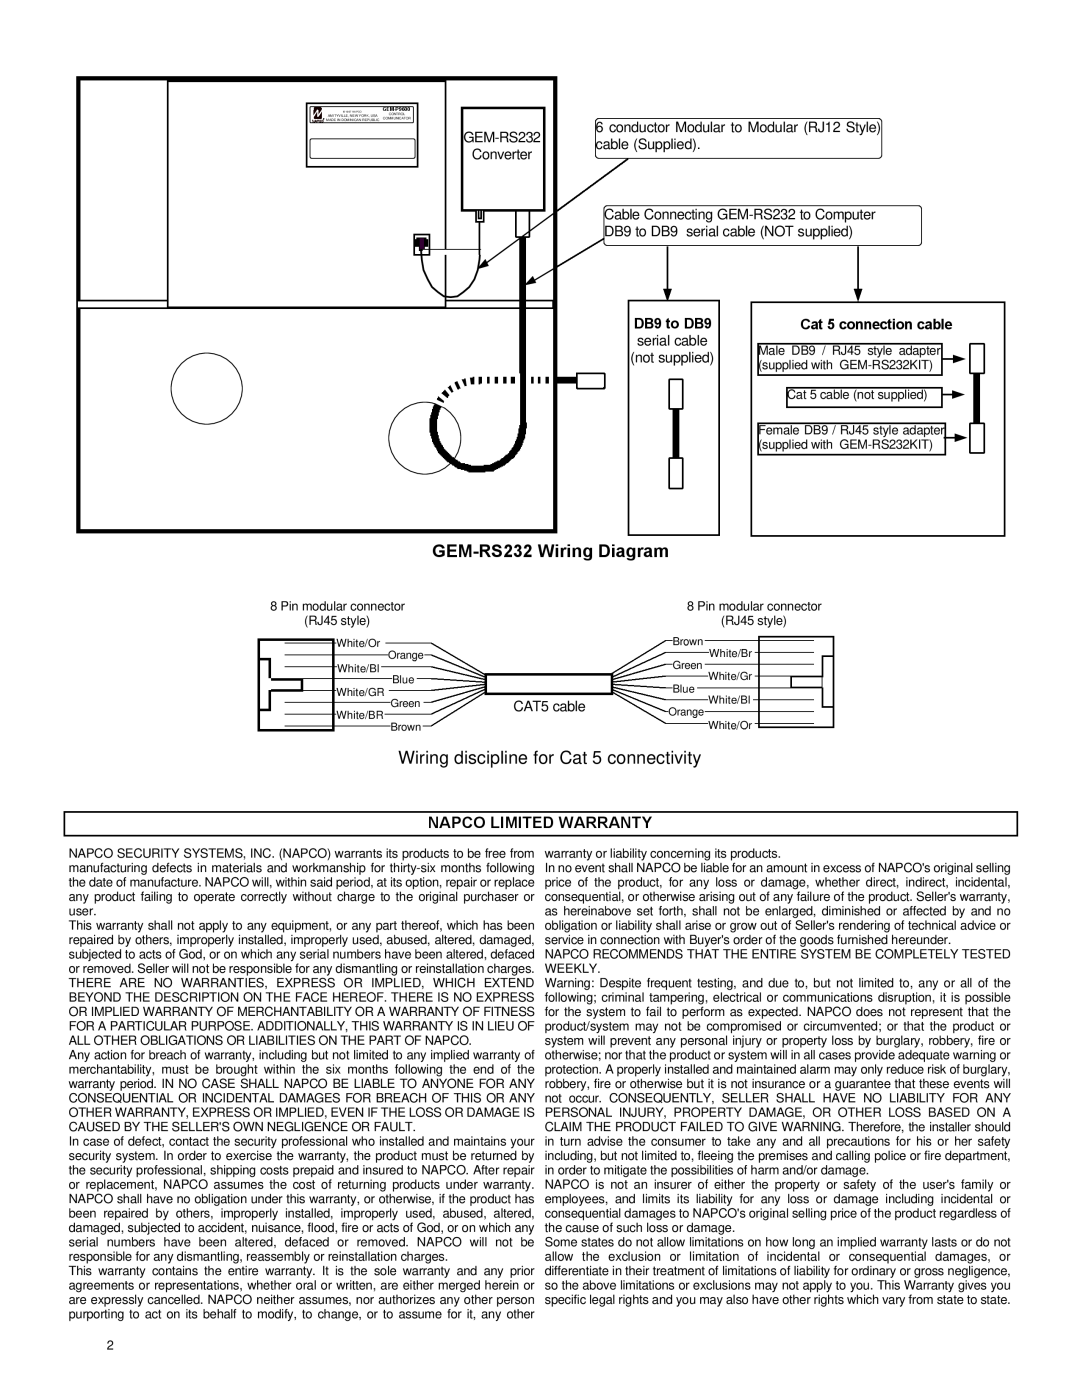 Napco Security Technologies GEM-RS232 Wiring Diagram, Napco Limited Warranty, GEM-RS232 Converter, CAT5 cable 